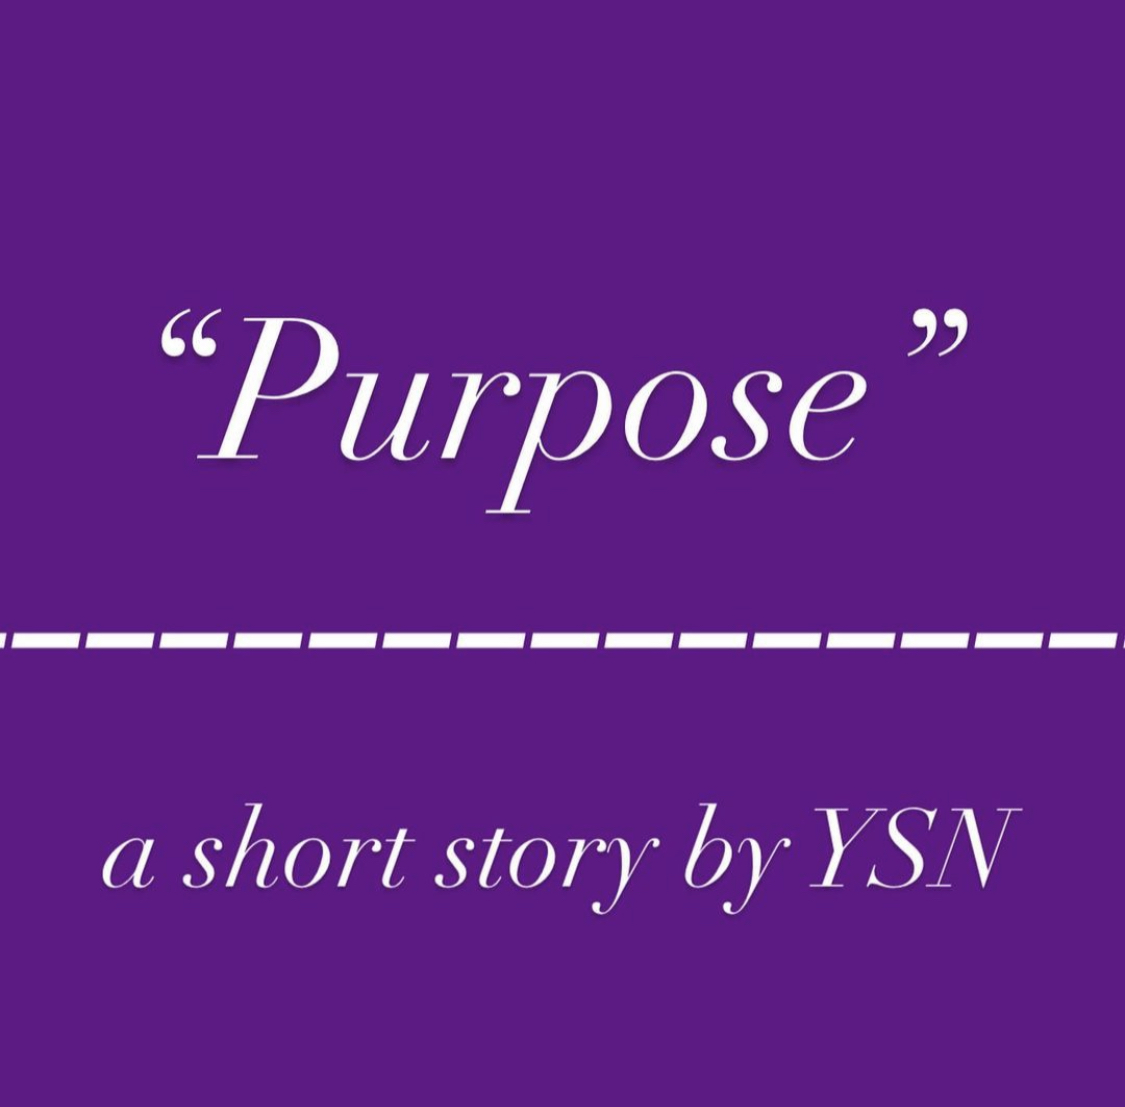 “Purpose” a short story by YSN